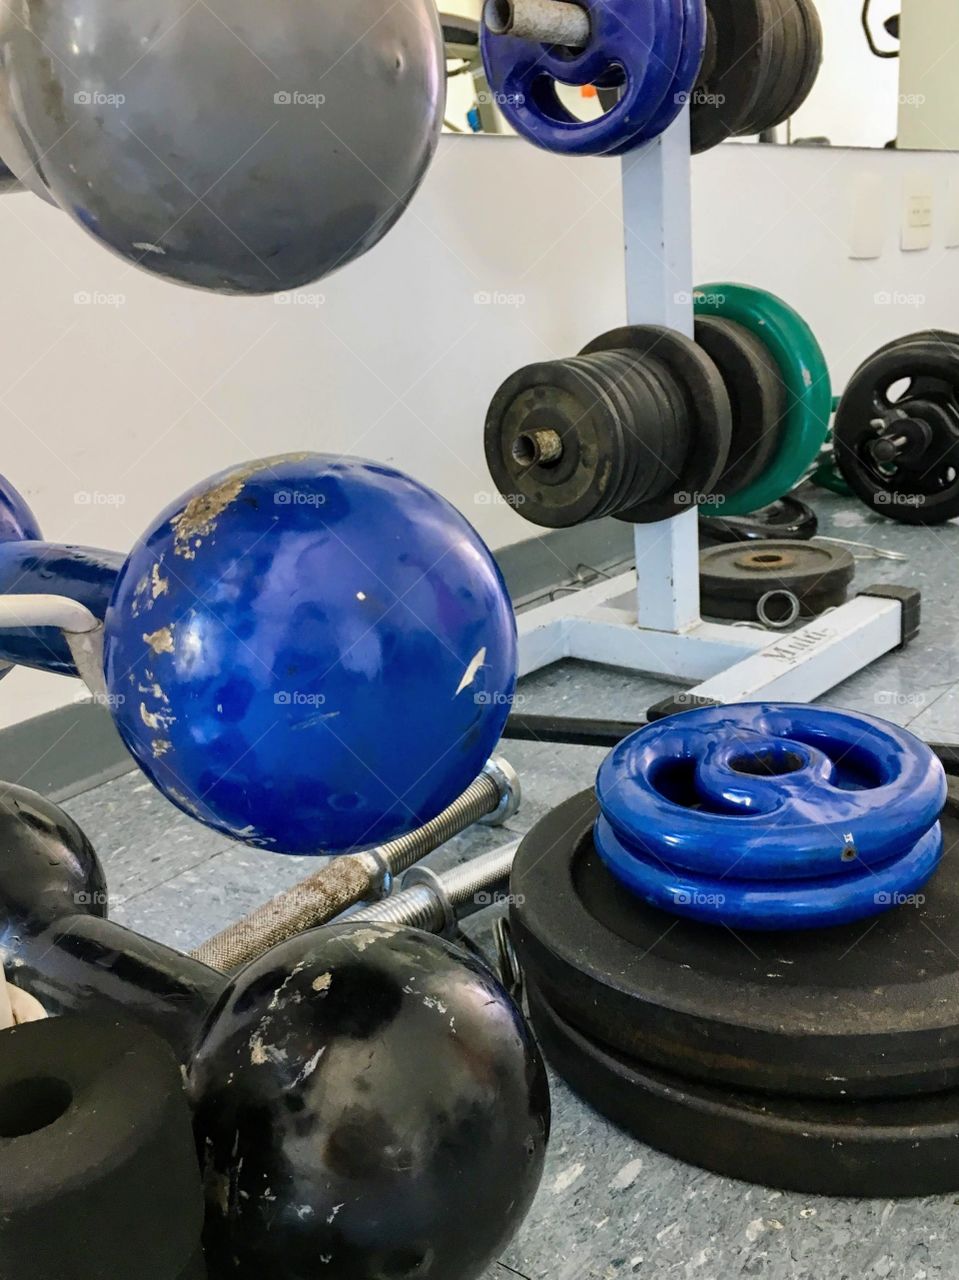 Equipment used in gyms for muscle strengthening